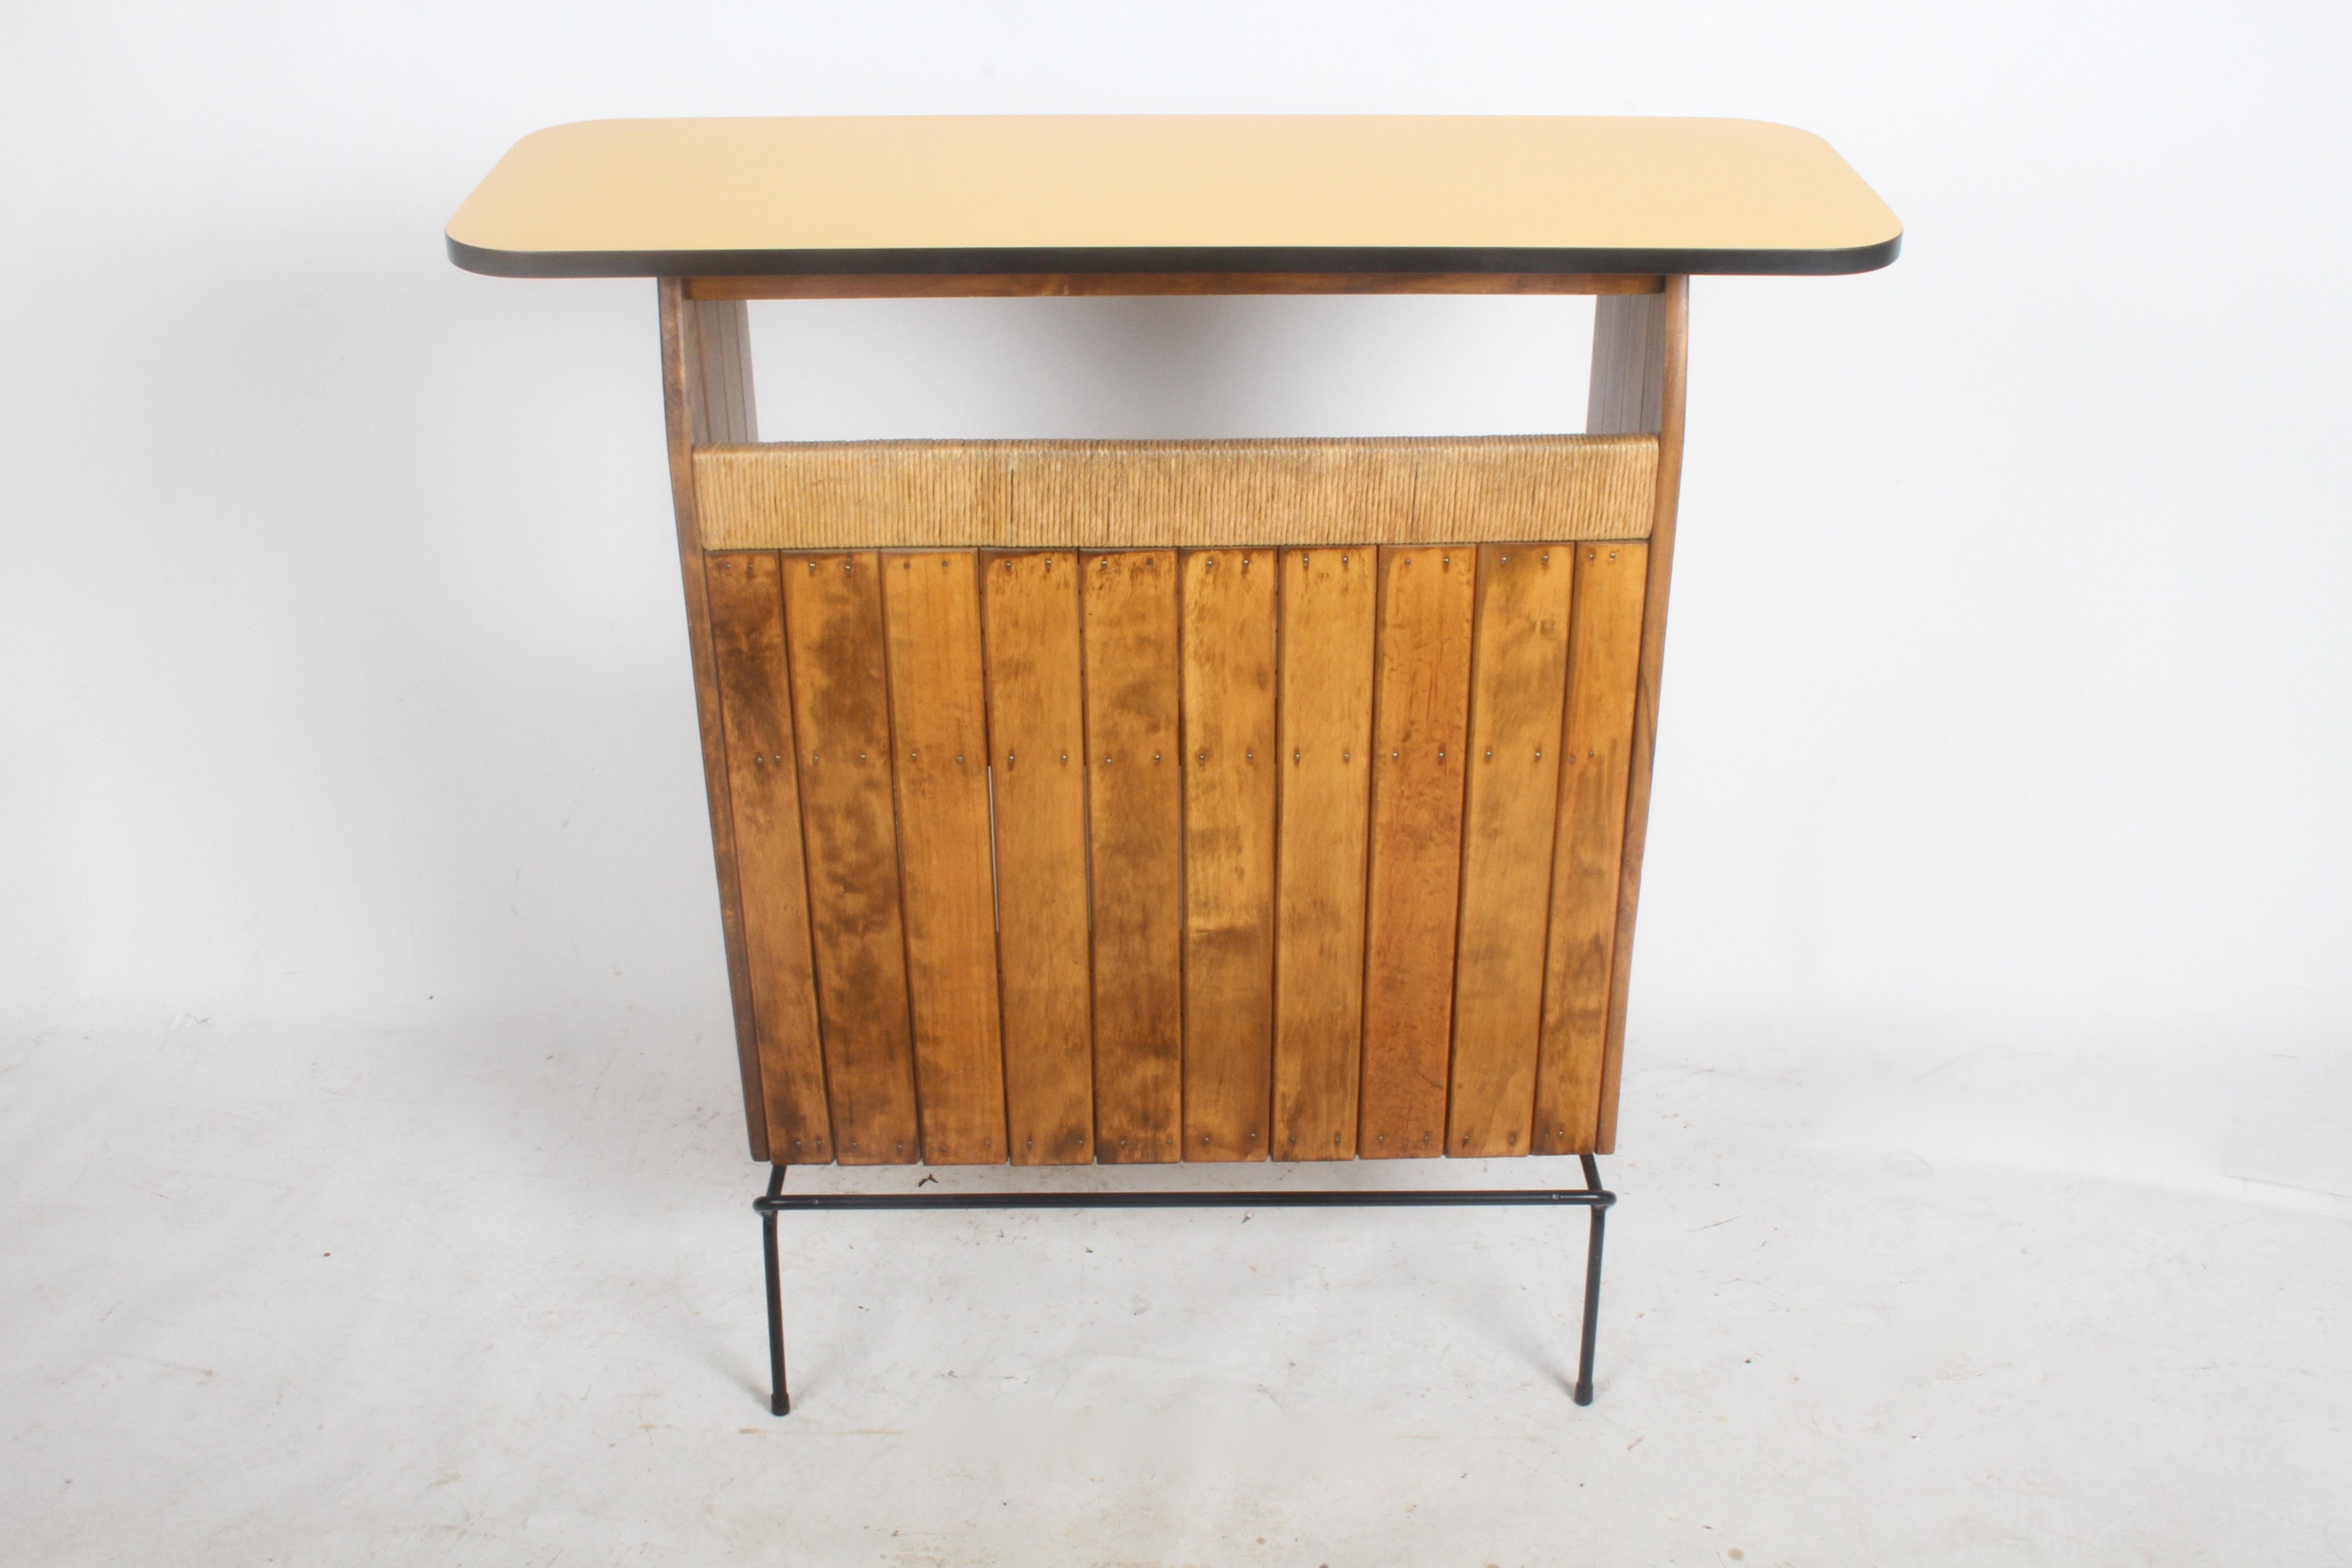 Midcentury Arthur Umanoff bar for Raymor. Wrought iron base, oak slats, rush and Formica top. Overall nice original condition, oak restored, wrought iron base repainted, top in very nice condition, no issues. Top surface is 15